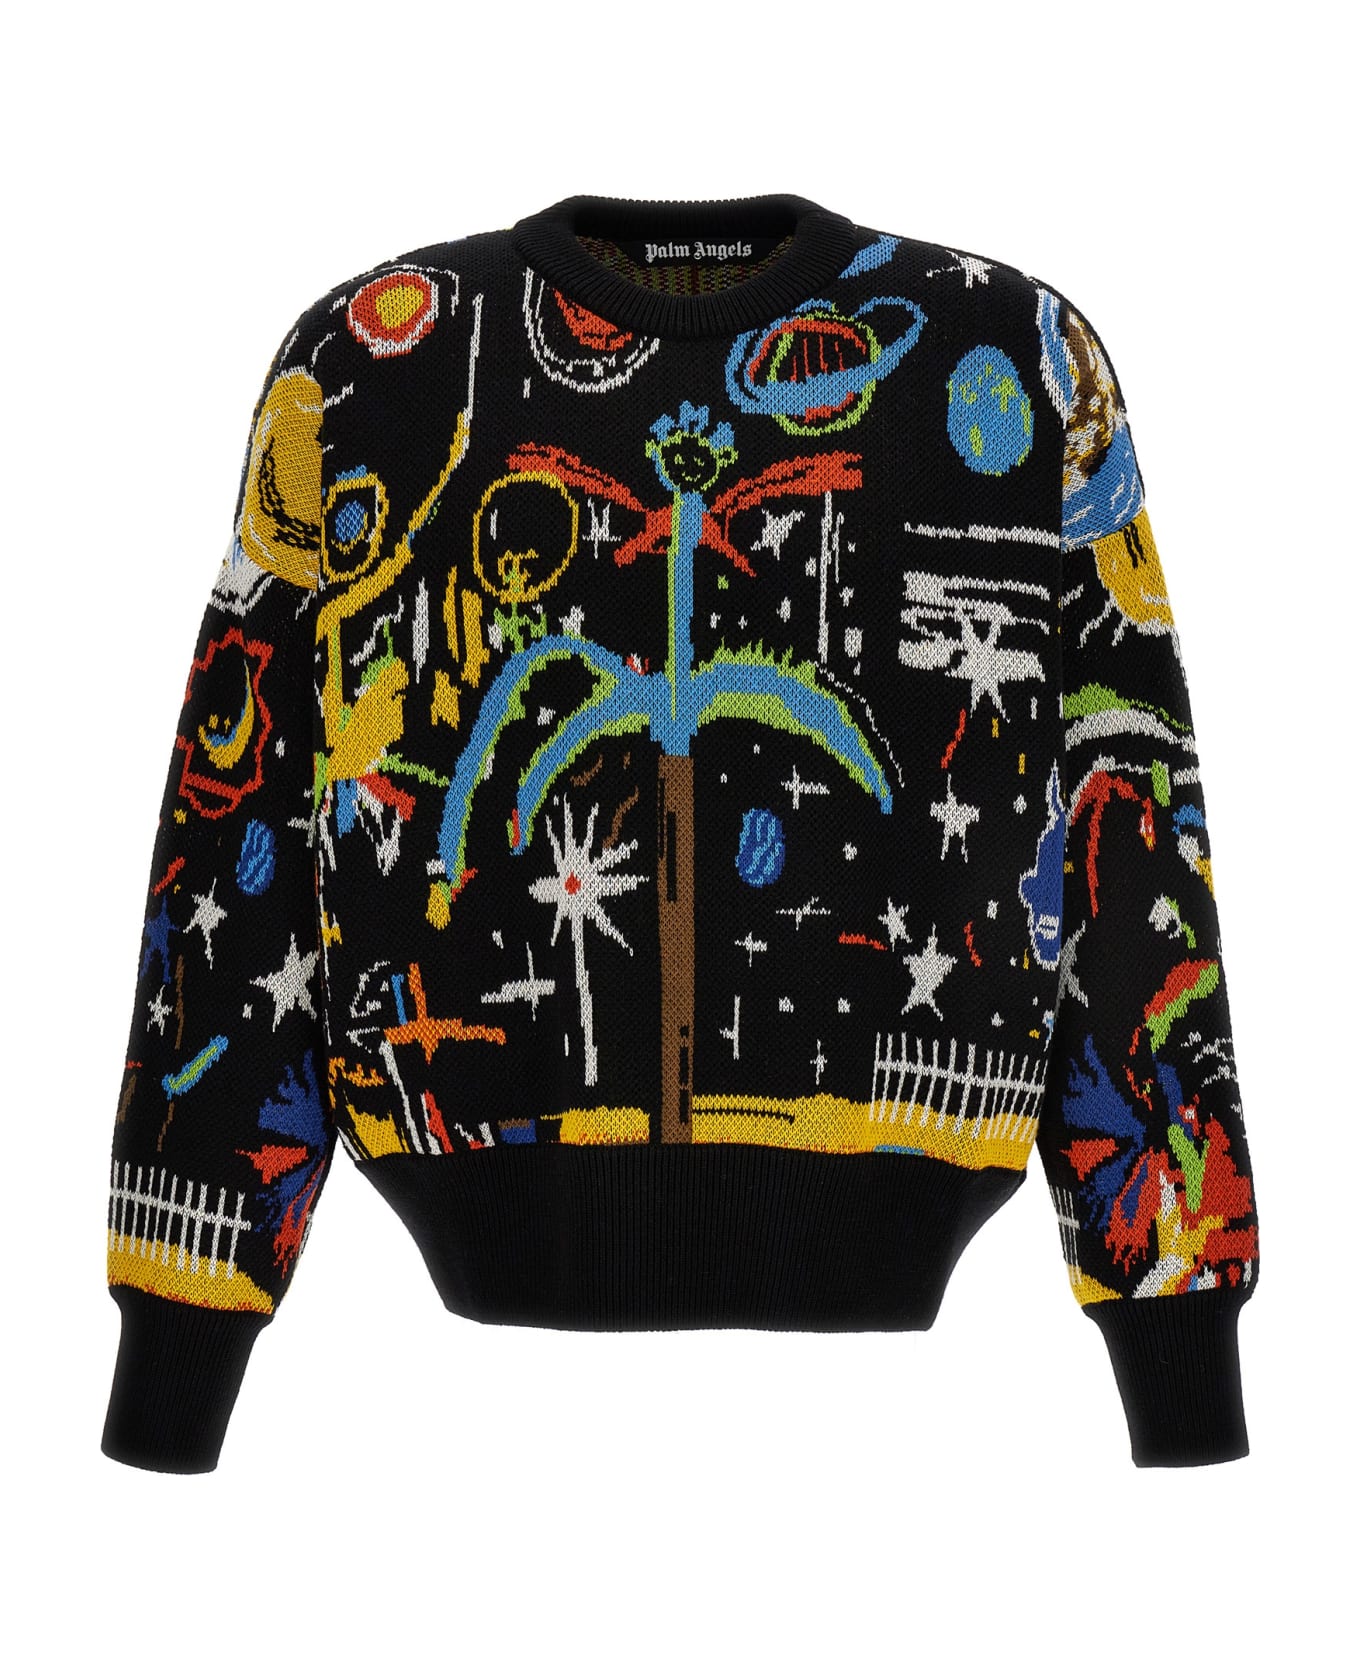 Palm Angels Starry Night Sweater - Multicolor ニットウェア